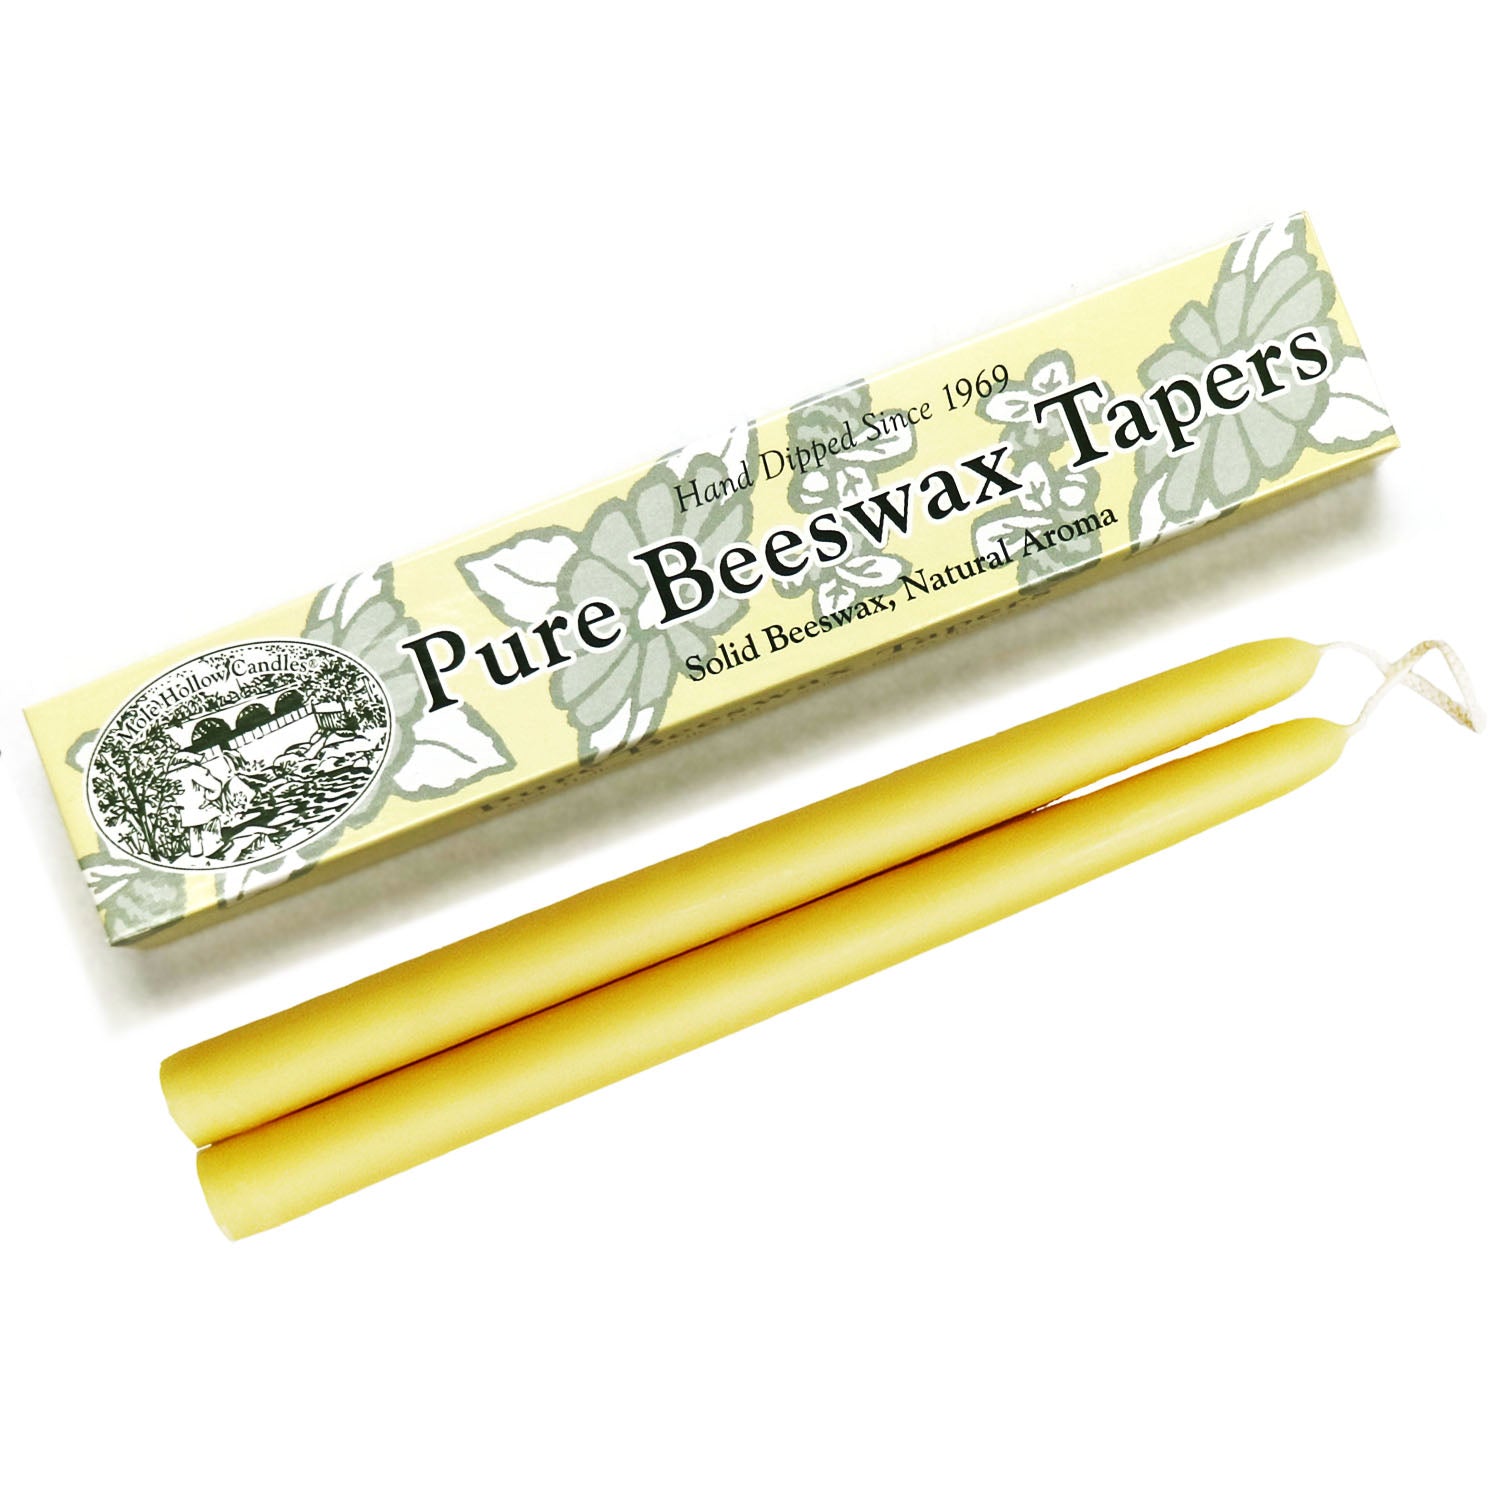 10 inch Beeswax Taper Pair - Beeswax Candles - Mole Hollow Candles